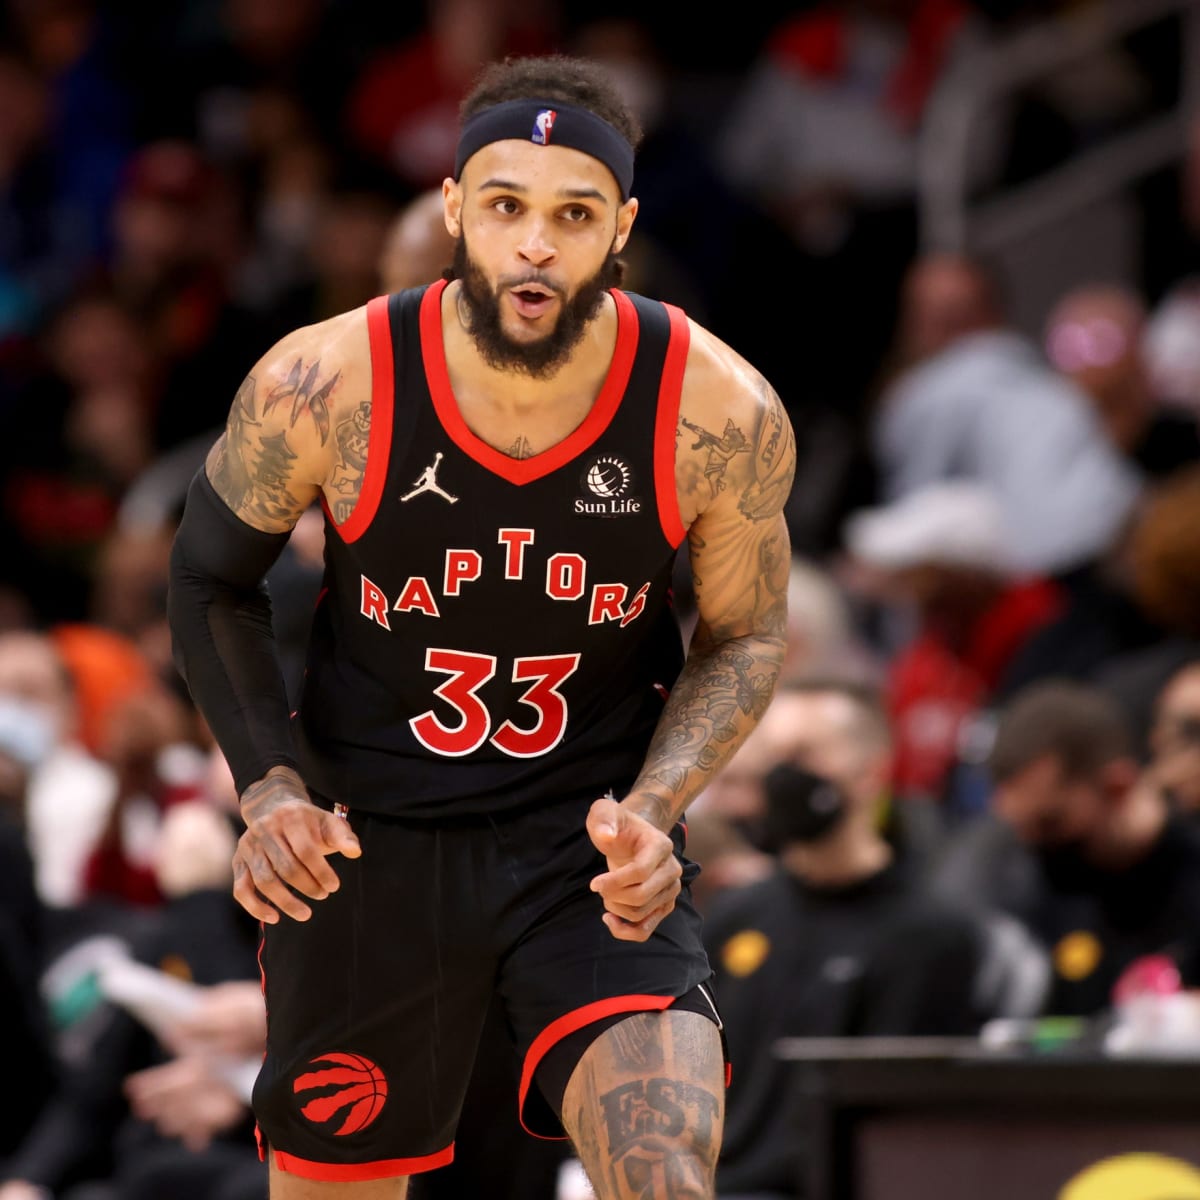 2022 Raptors report cards: What grade did Gary Trent Jr. earn for